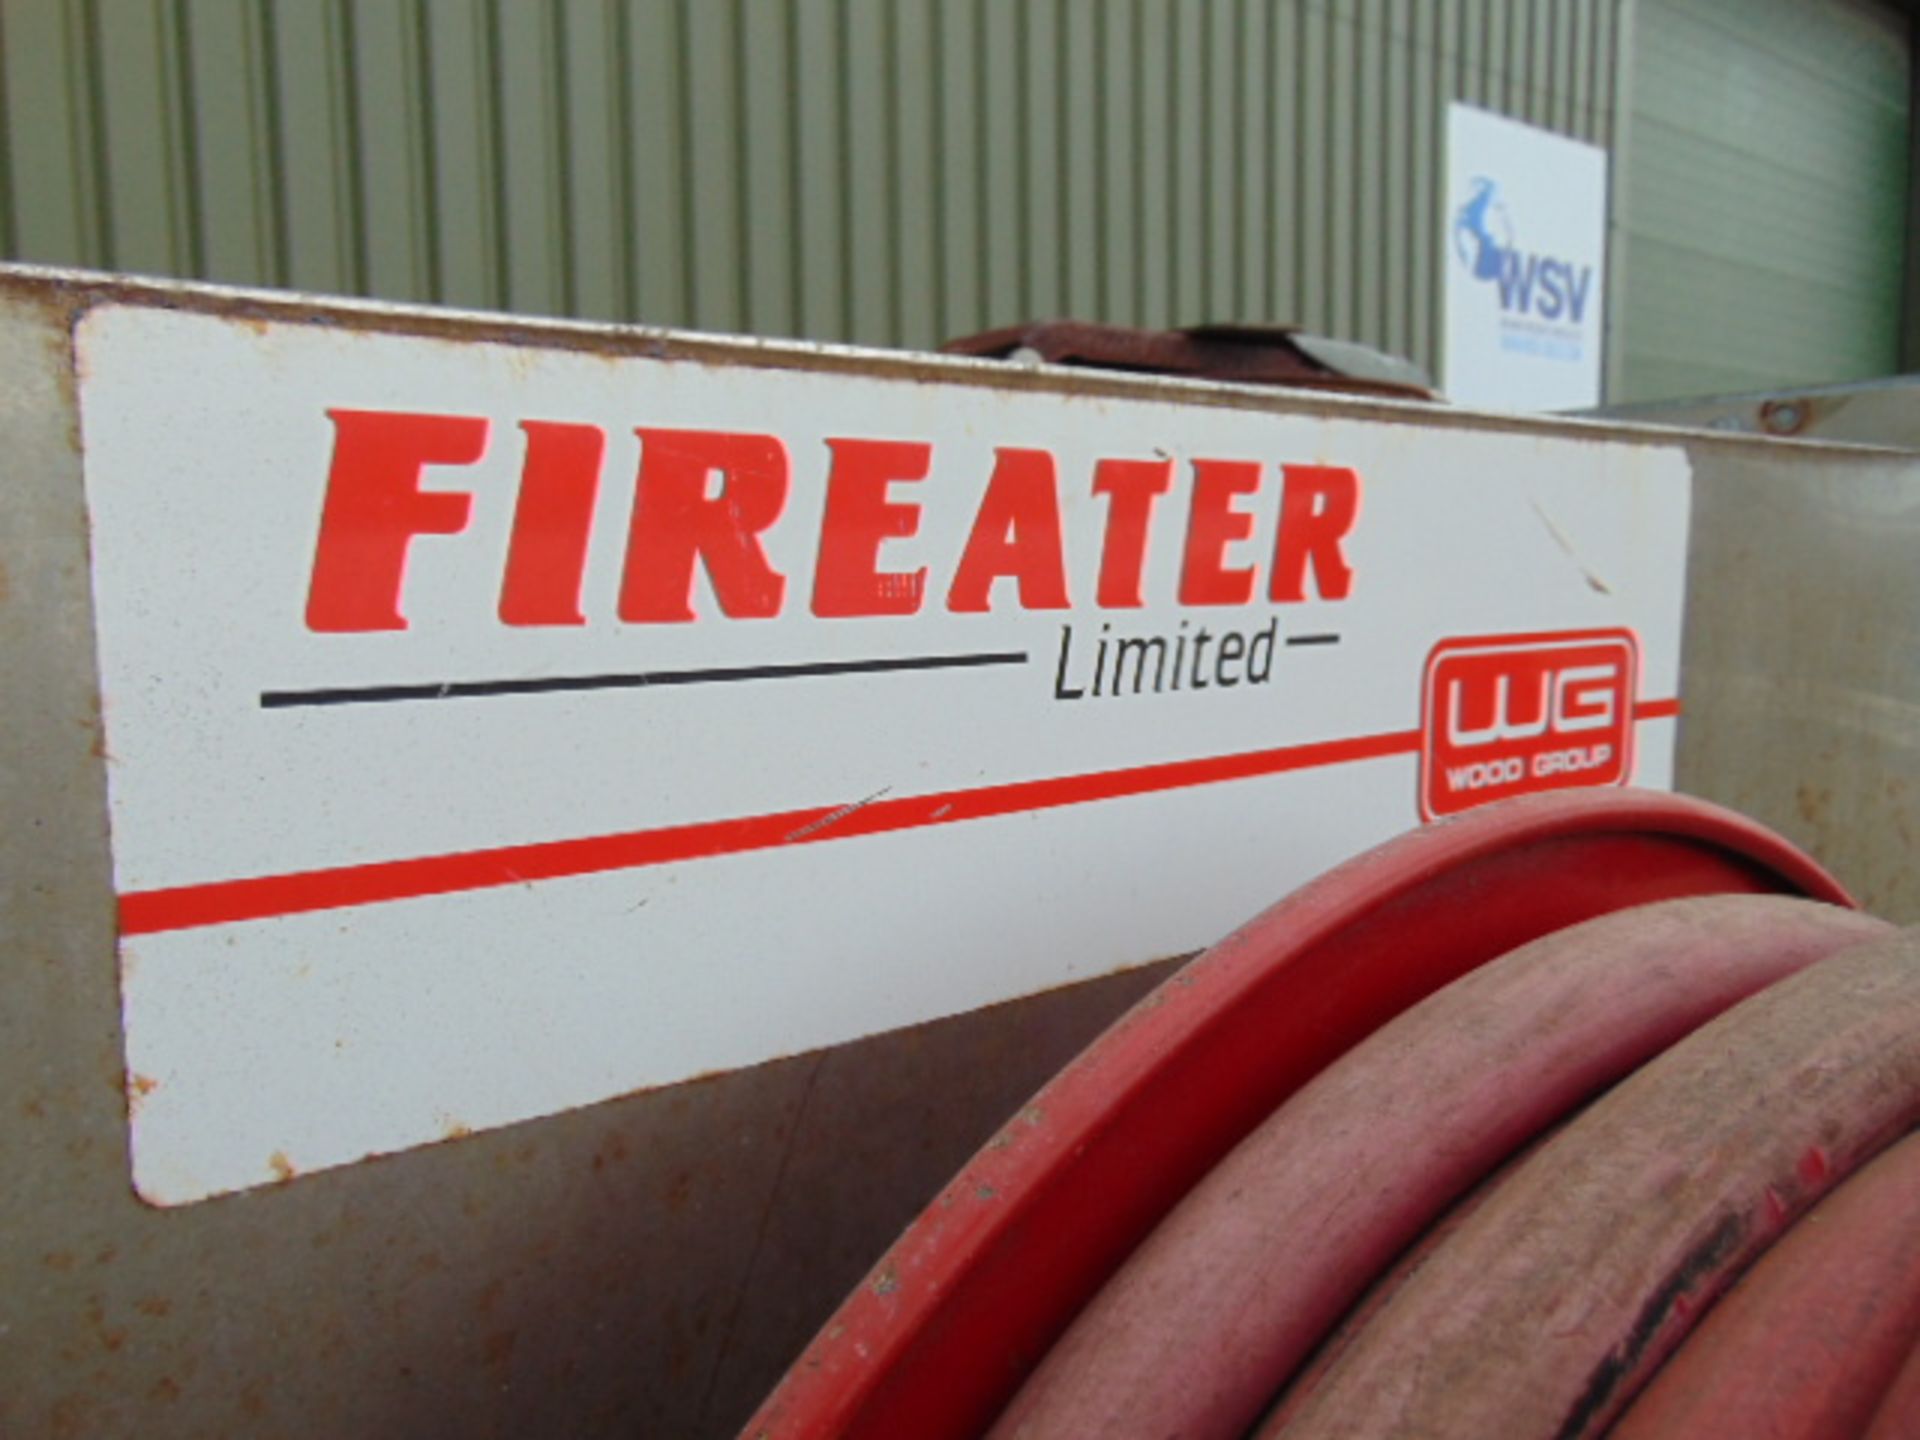 700L Fireater AFFF (Aqueous Film-Forming Foam) stainless steelTanks c/w 2 x 10m Fire Hose Reels. - Image 8 of 10